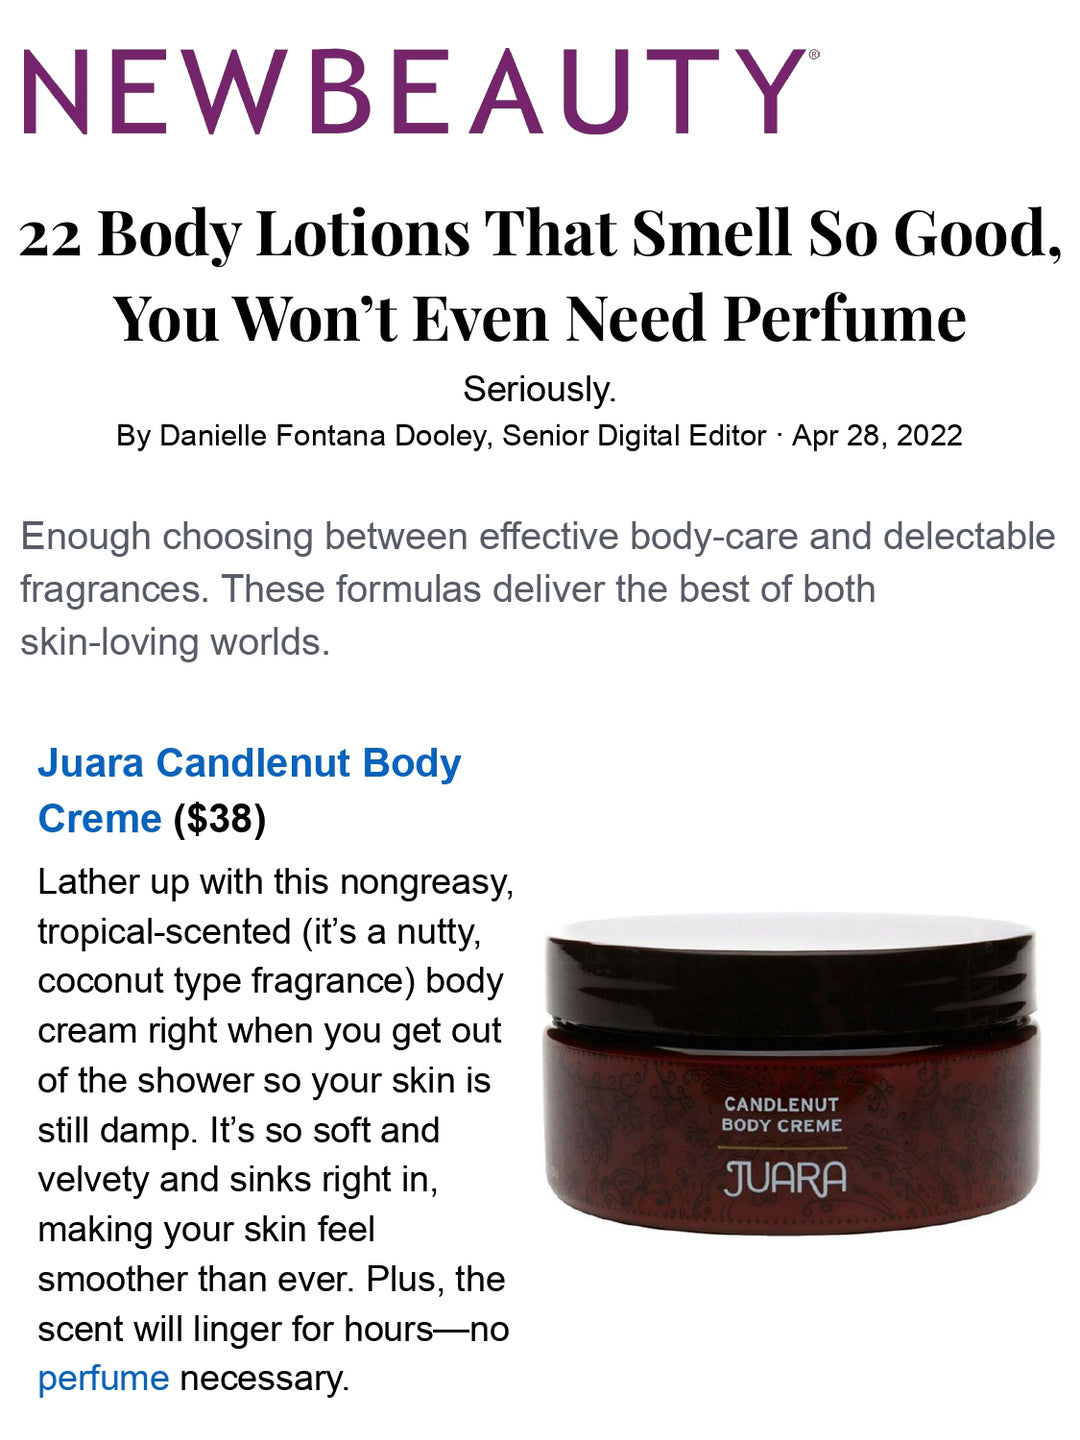 NEWBEAUTY: 22 Body Lotions That Smell So Good, You Won’t Even Need Perfume